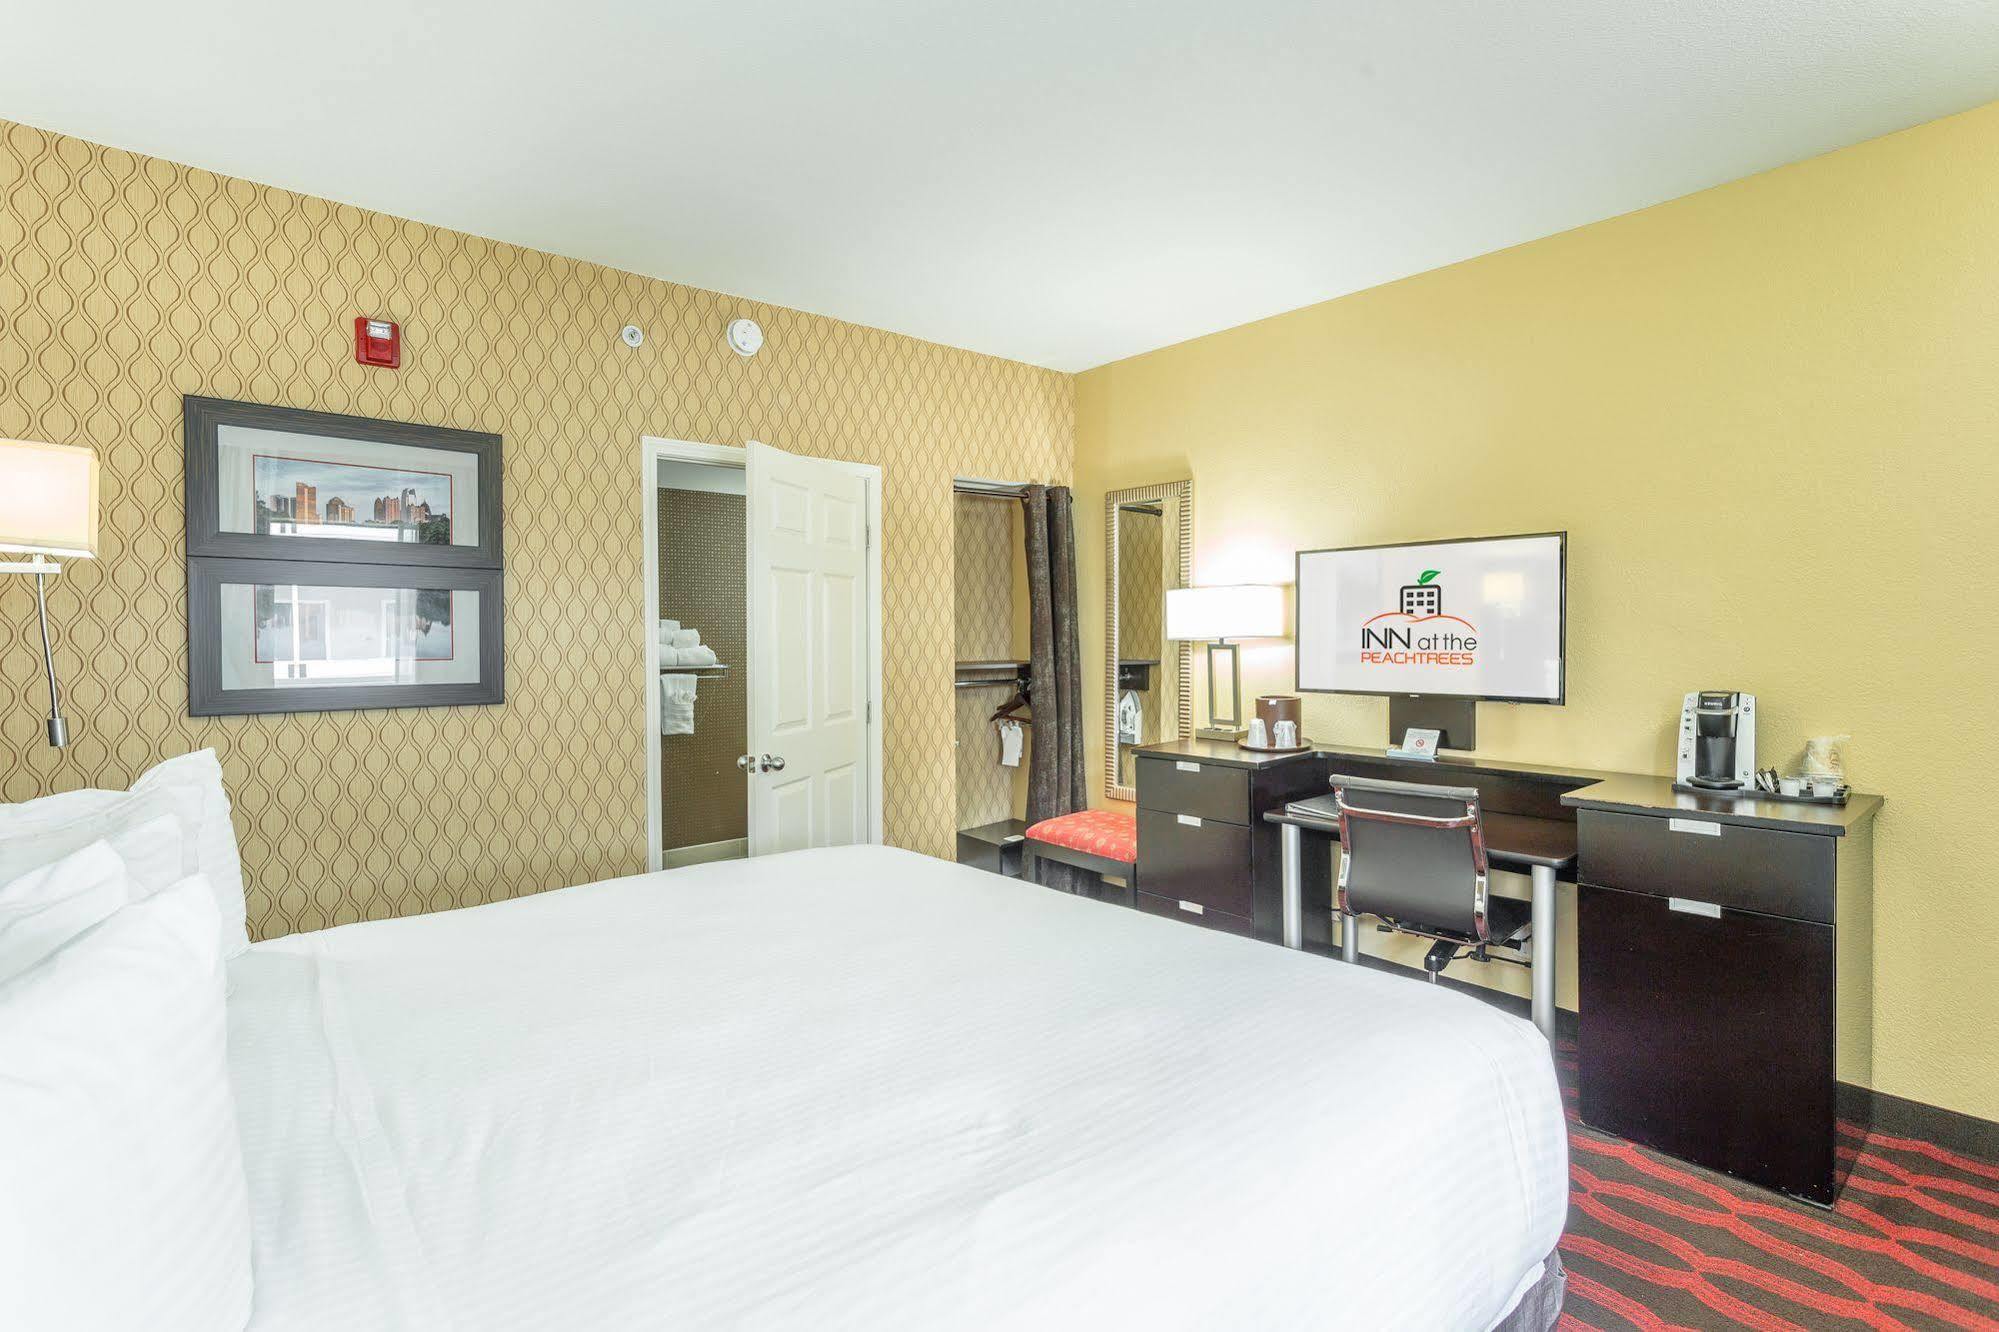 Inn At The Peachtrees, An Ascend Hotel Collection Member Atlanta Buitenkant foto